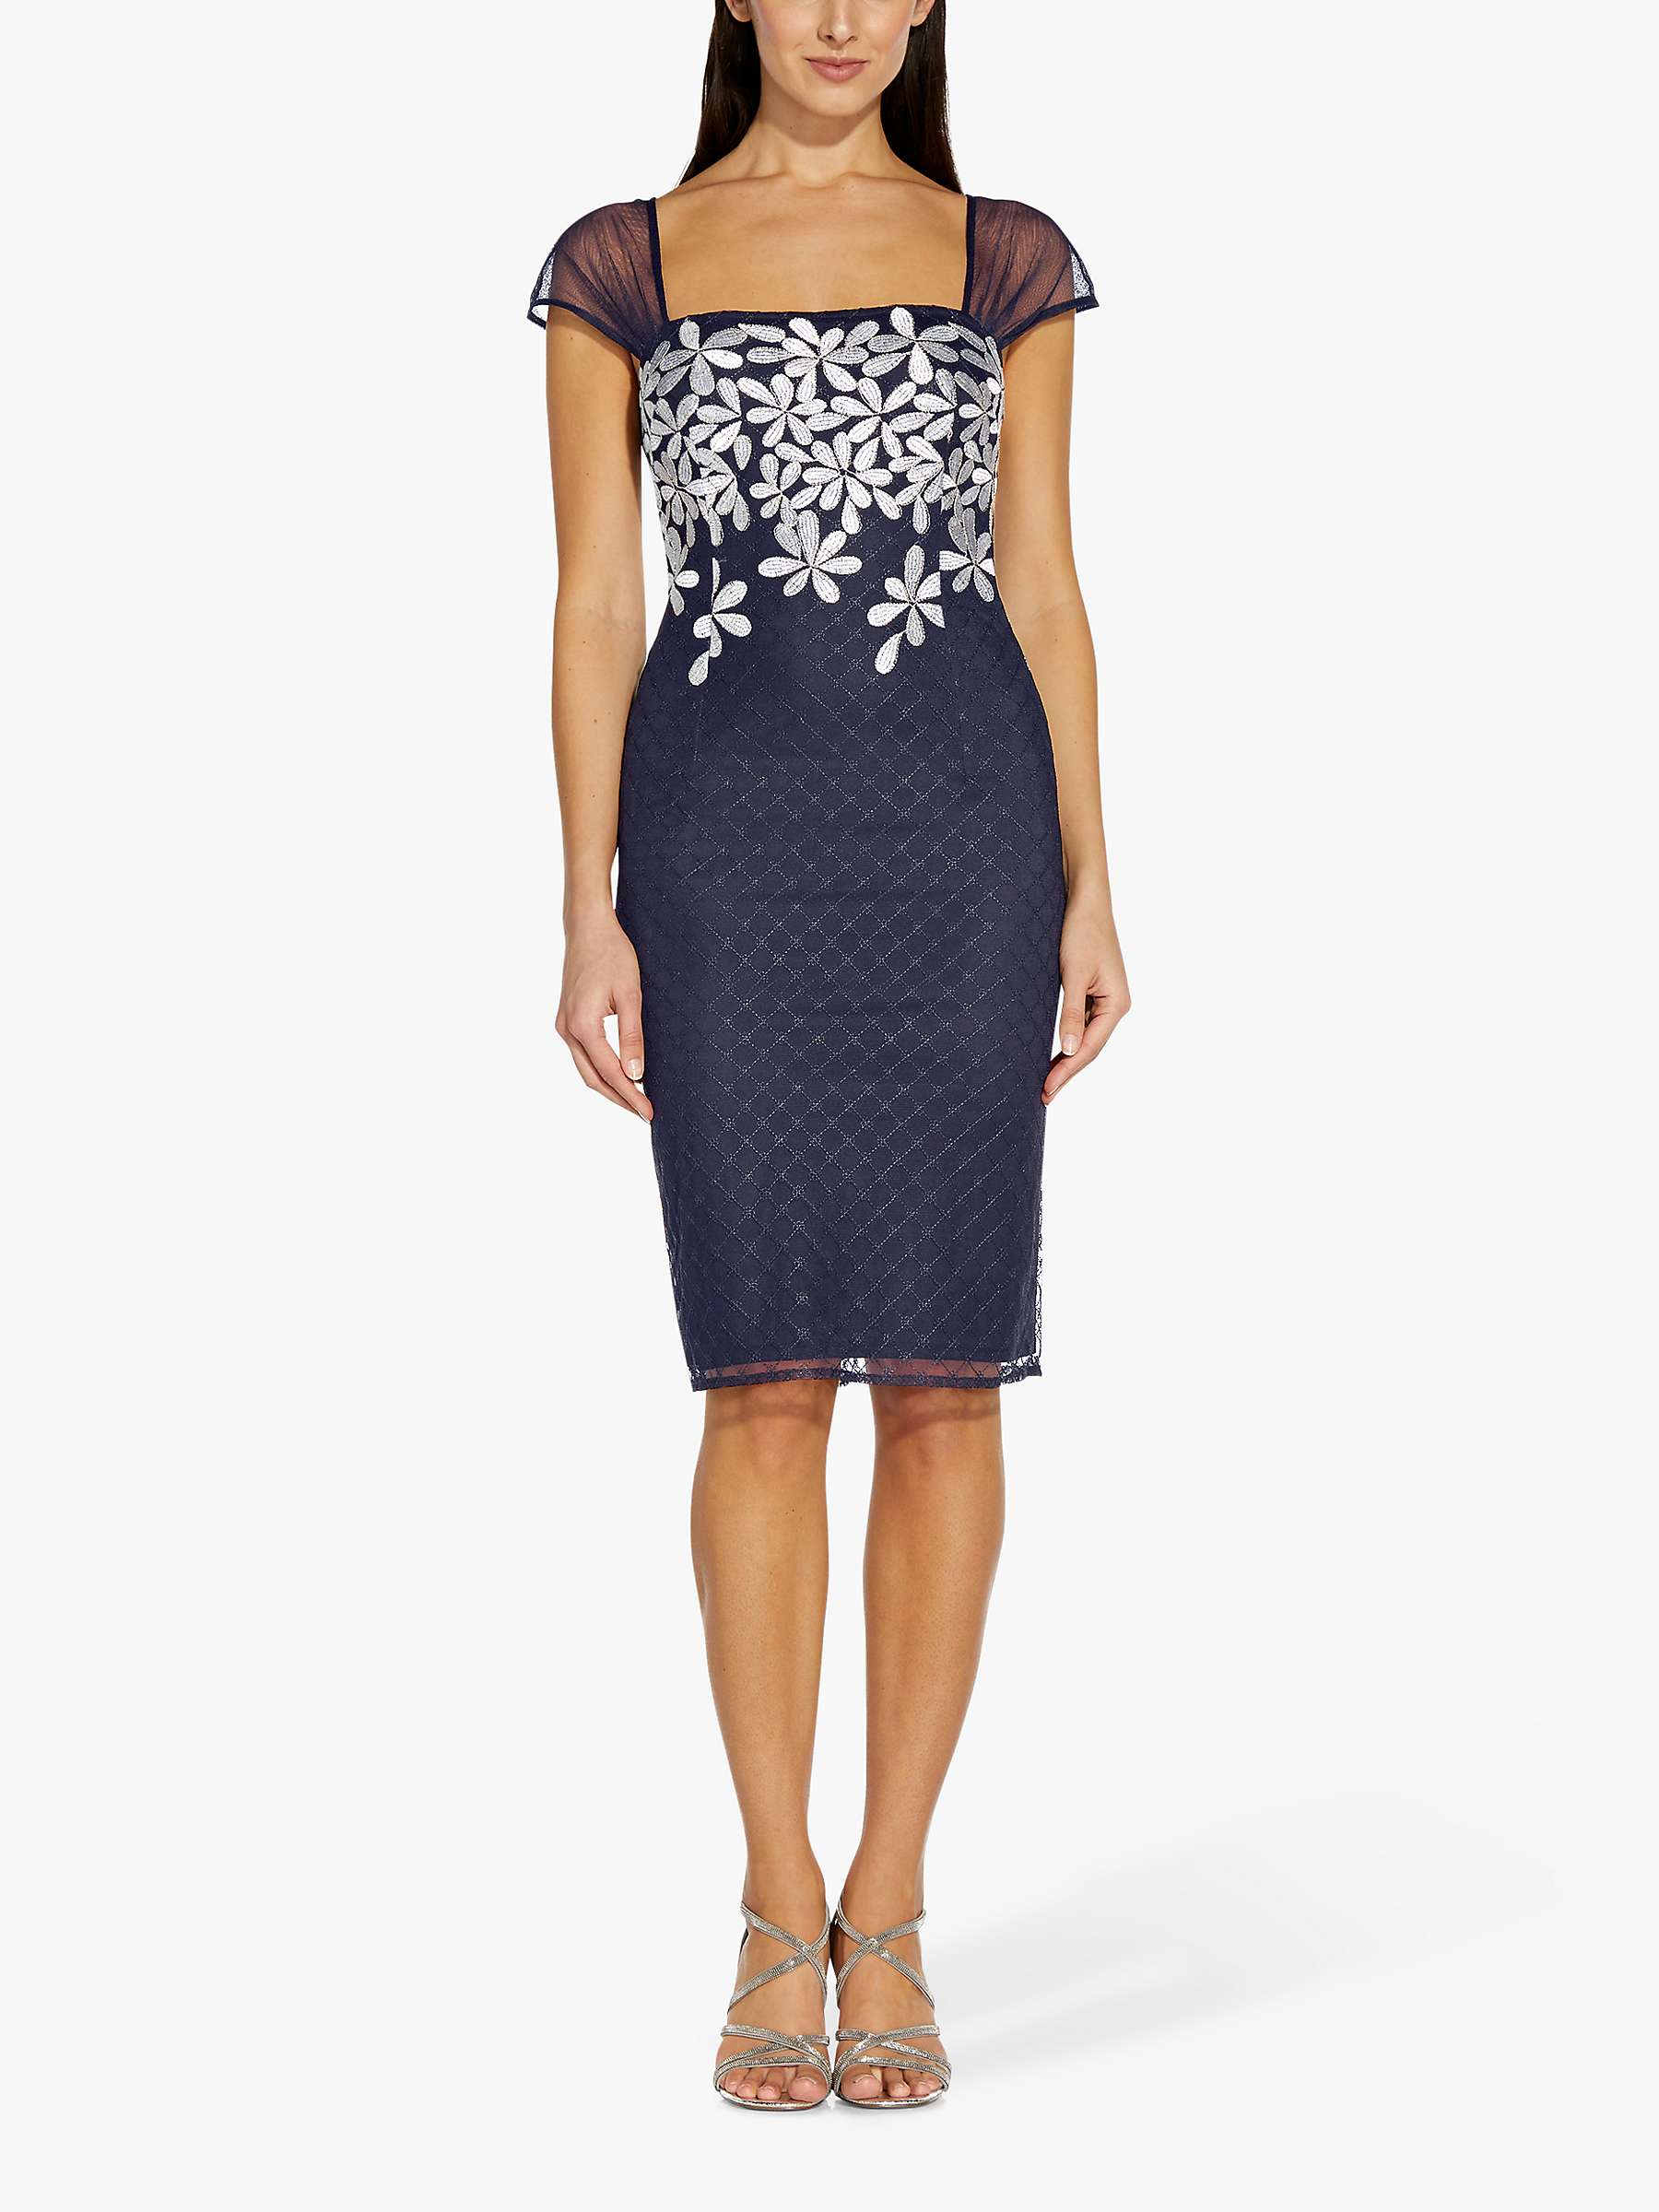 Buy Adrianna Papell Embroidered Floral Cap Sleeve Dress, Navy/Ivory Online at johnlewis.com